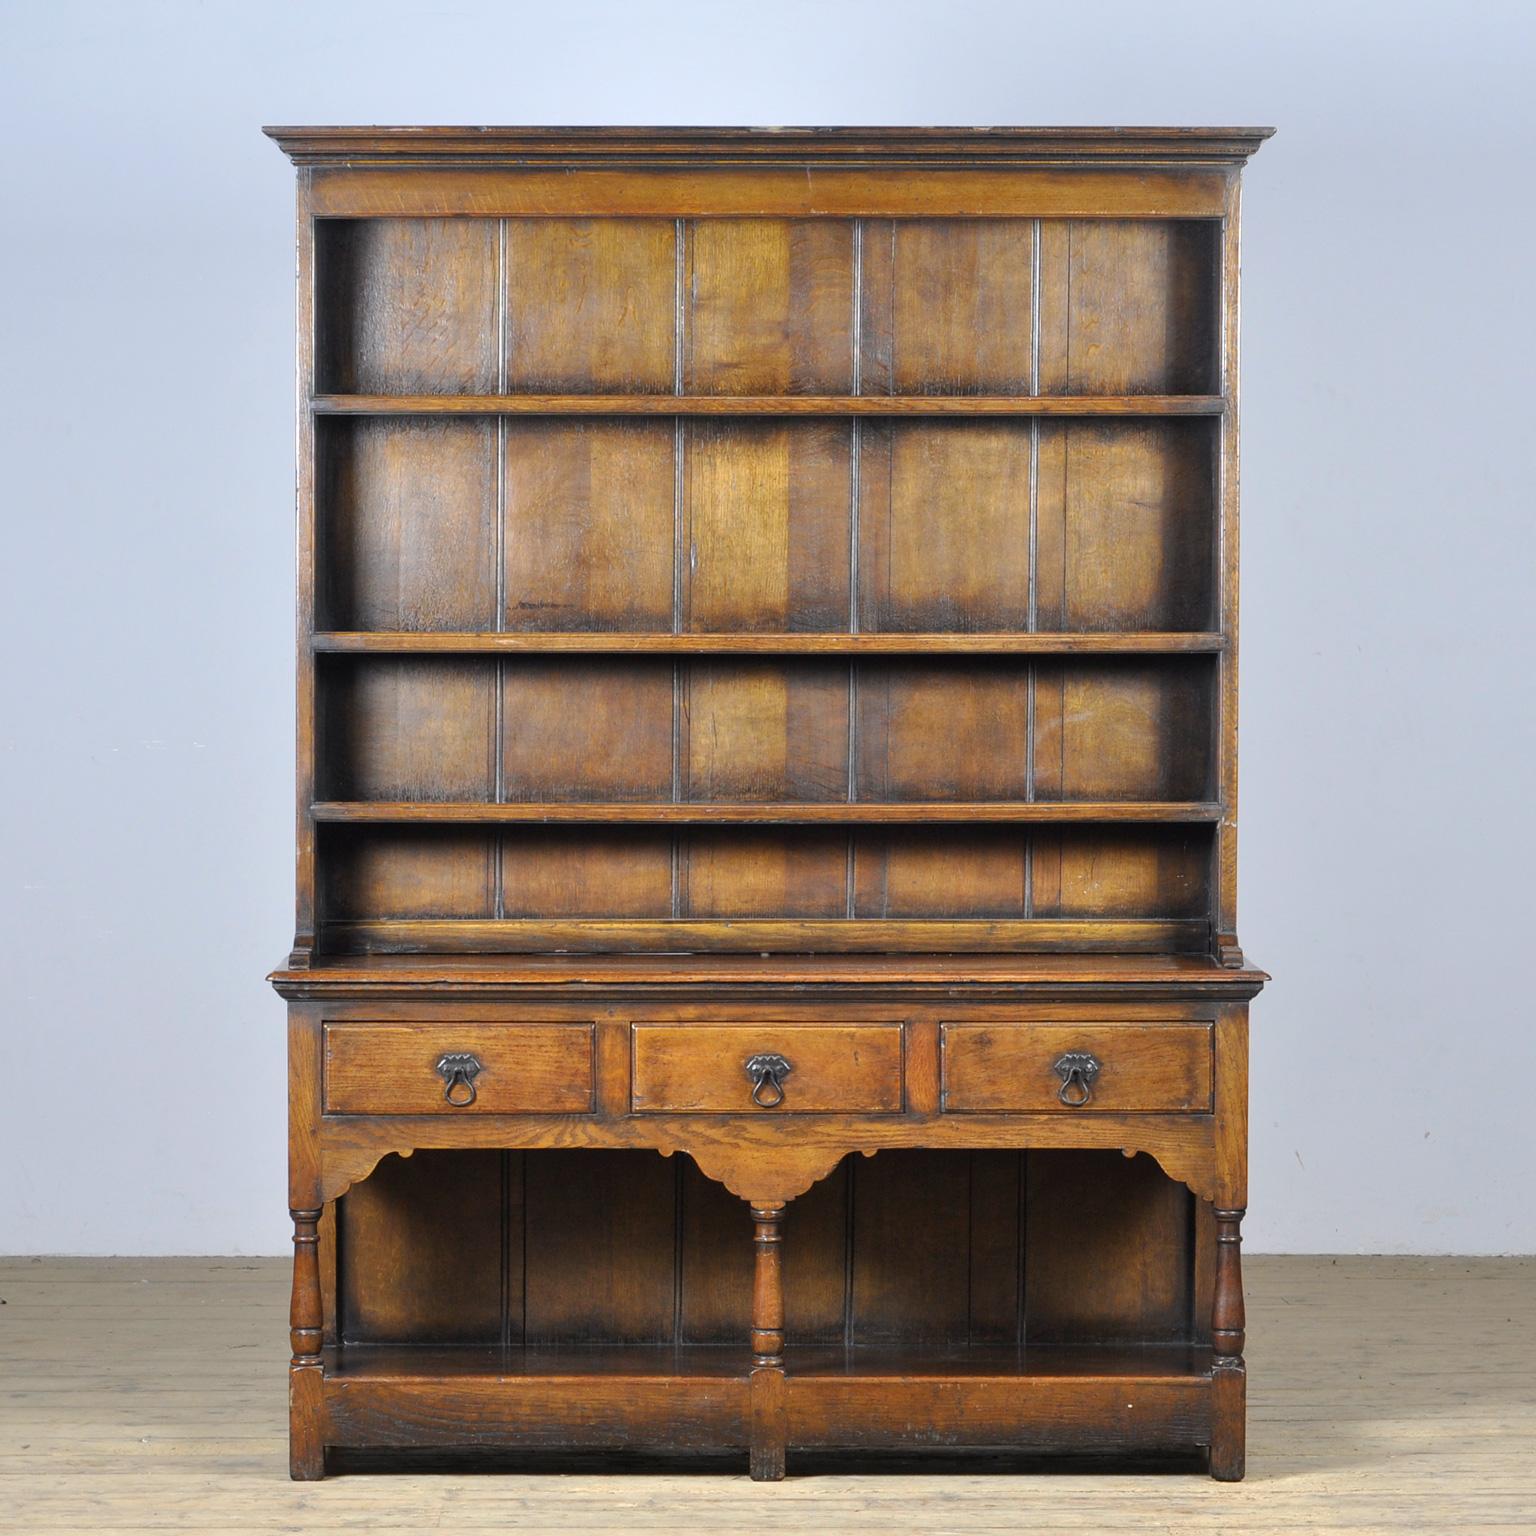 19th Century (circa 1850) sideboard in oak. Beautiful English cabinet from the Welsh region.
It consists of three shelves for placing the dishes. The bottom of the sideboard consists of three drawers and a beautiful base. It has a lower shelf that